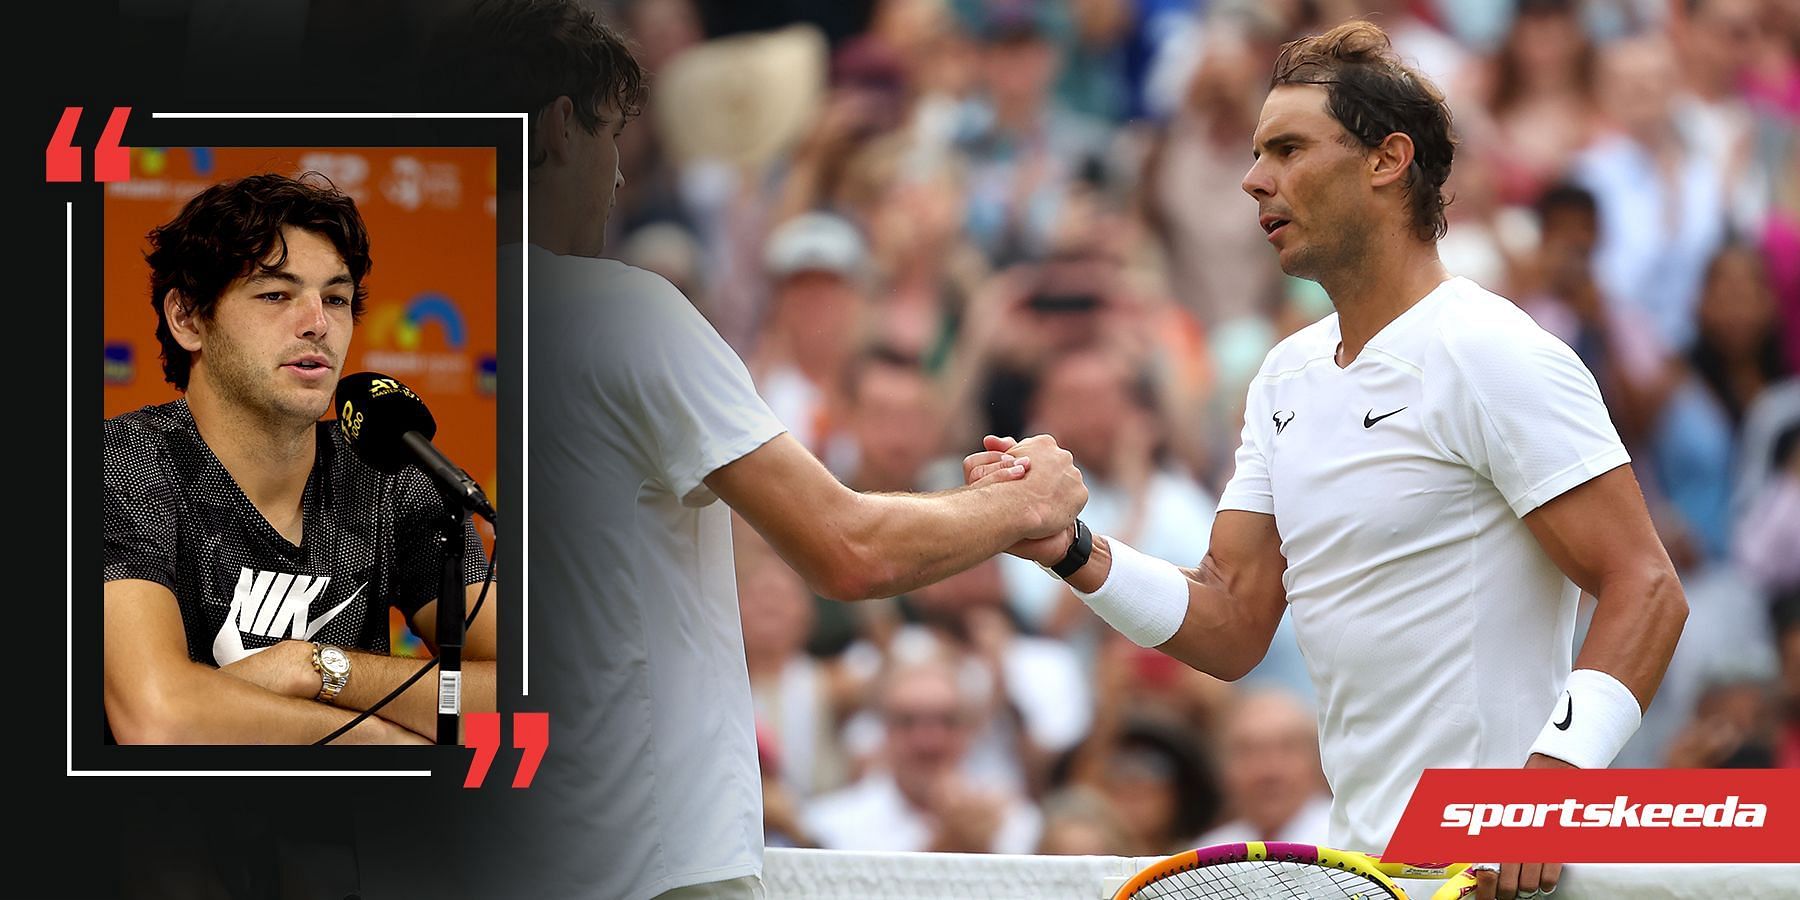 Rafael Nadal beat Taylor Fritz in a thrilling five-setter at the 2022 Wimbledon Championships.